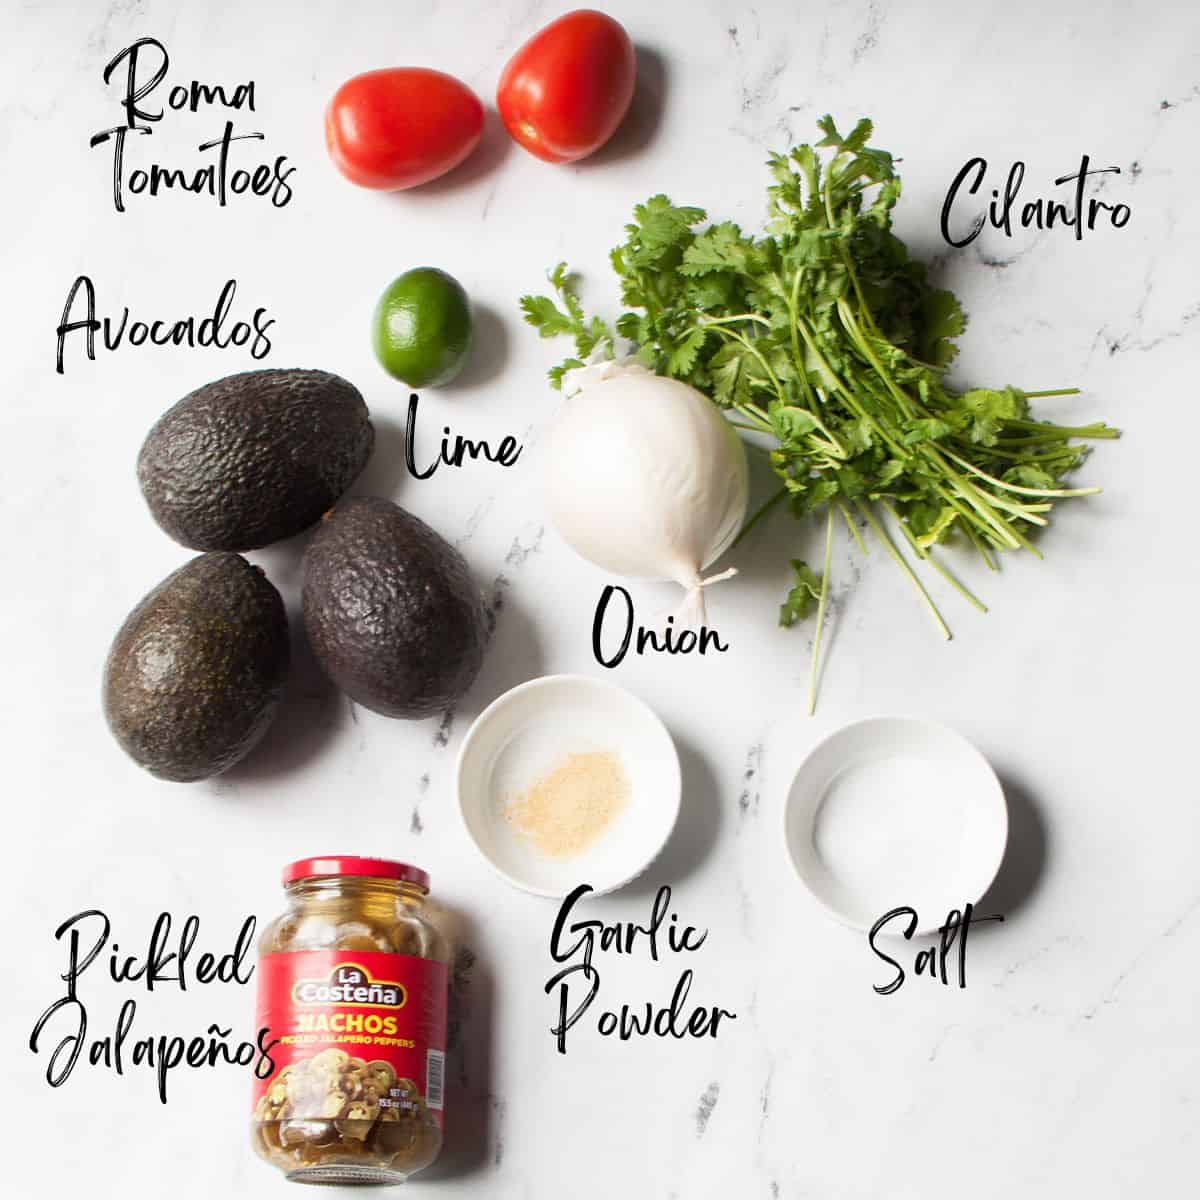 ingredients needed to make Guacamole with Pickled Jalapeños